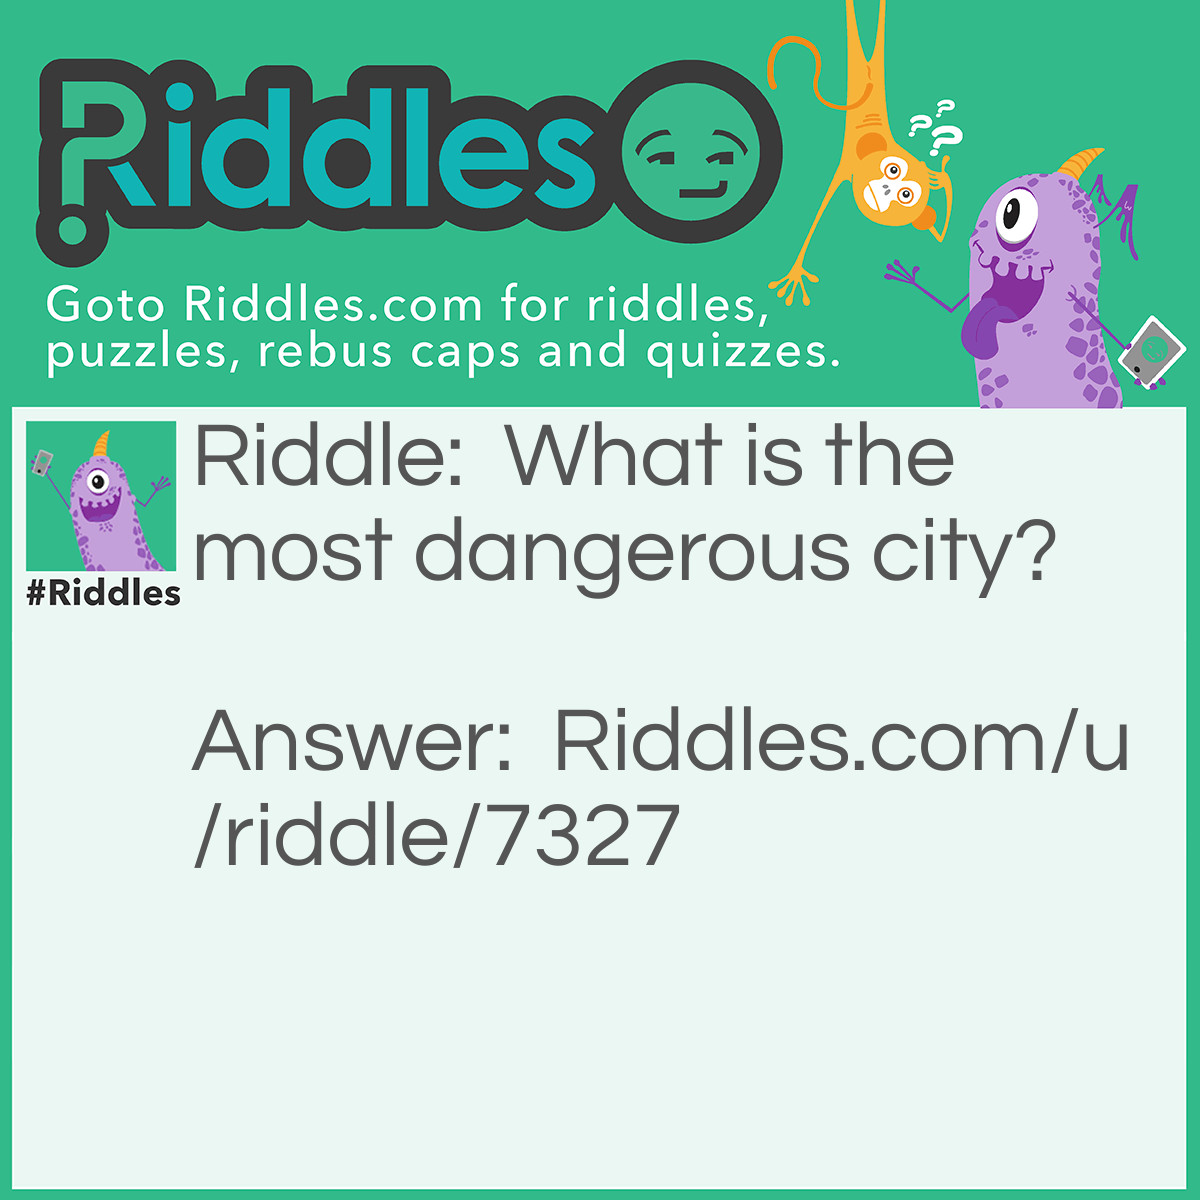 Riddle: What is the most dangerous city? Answer: Electricity.